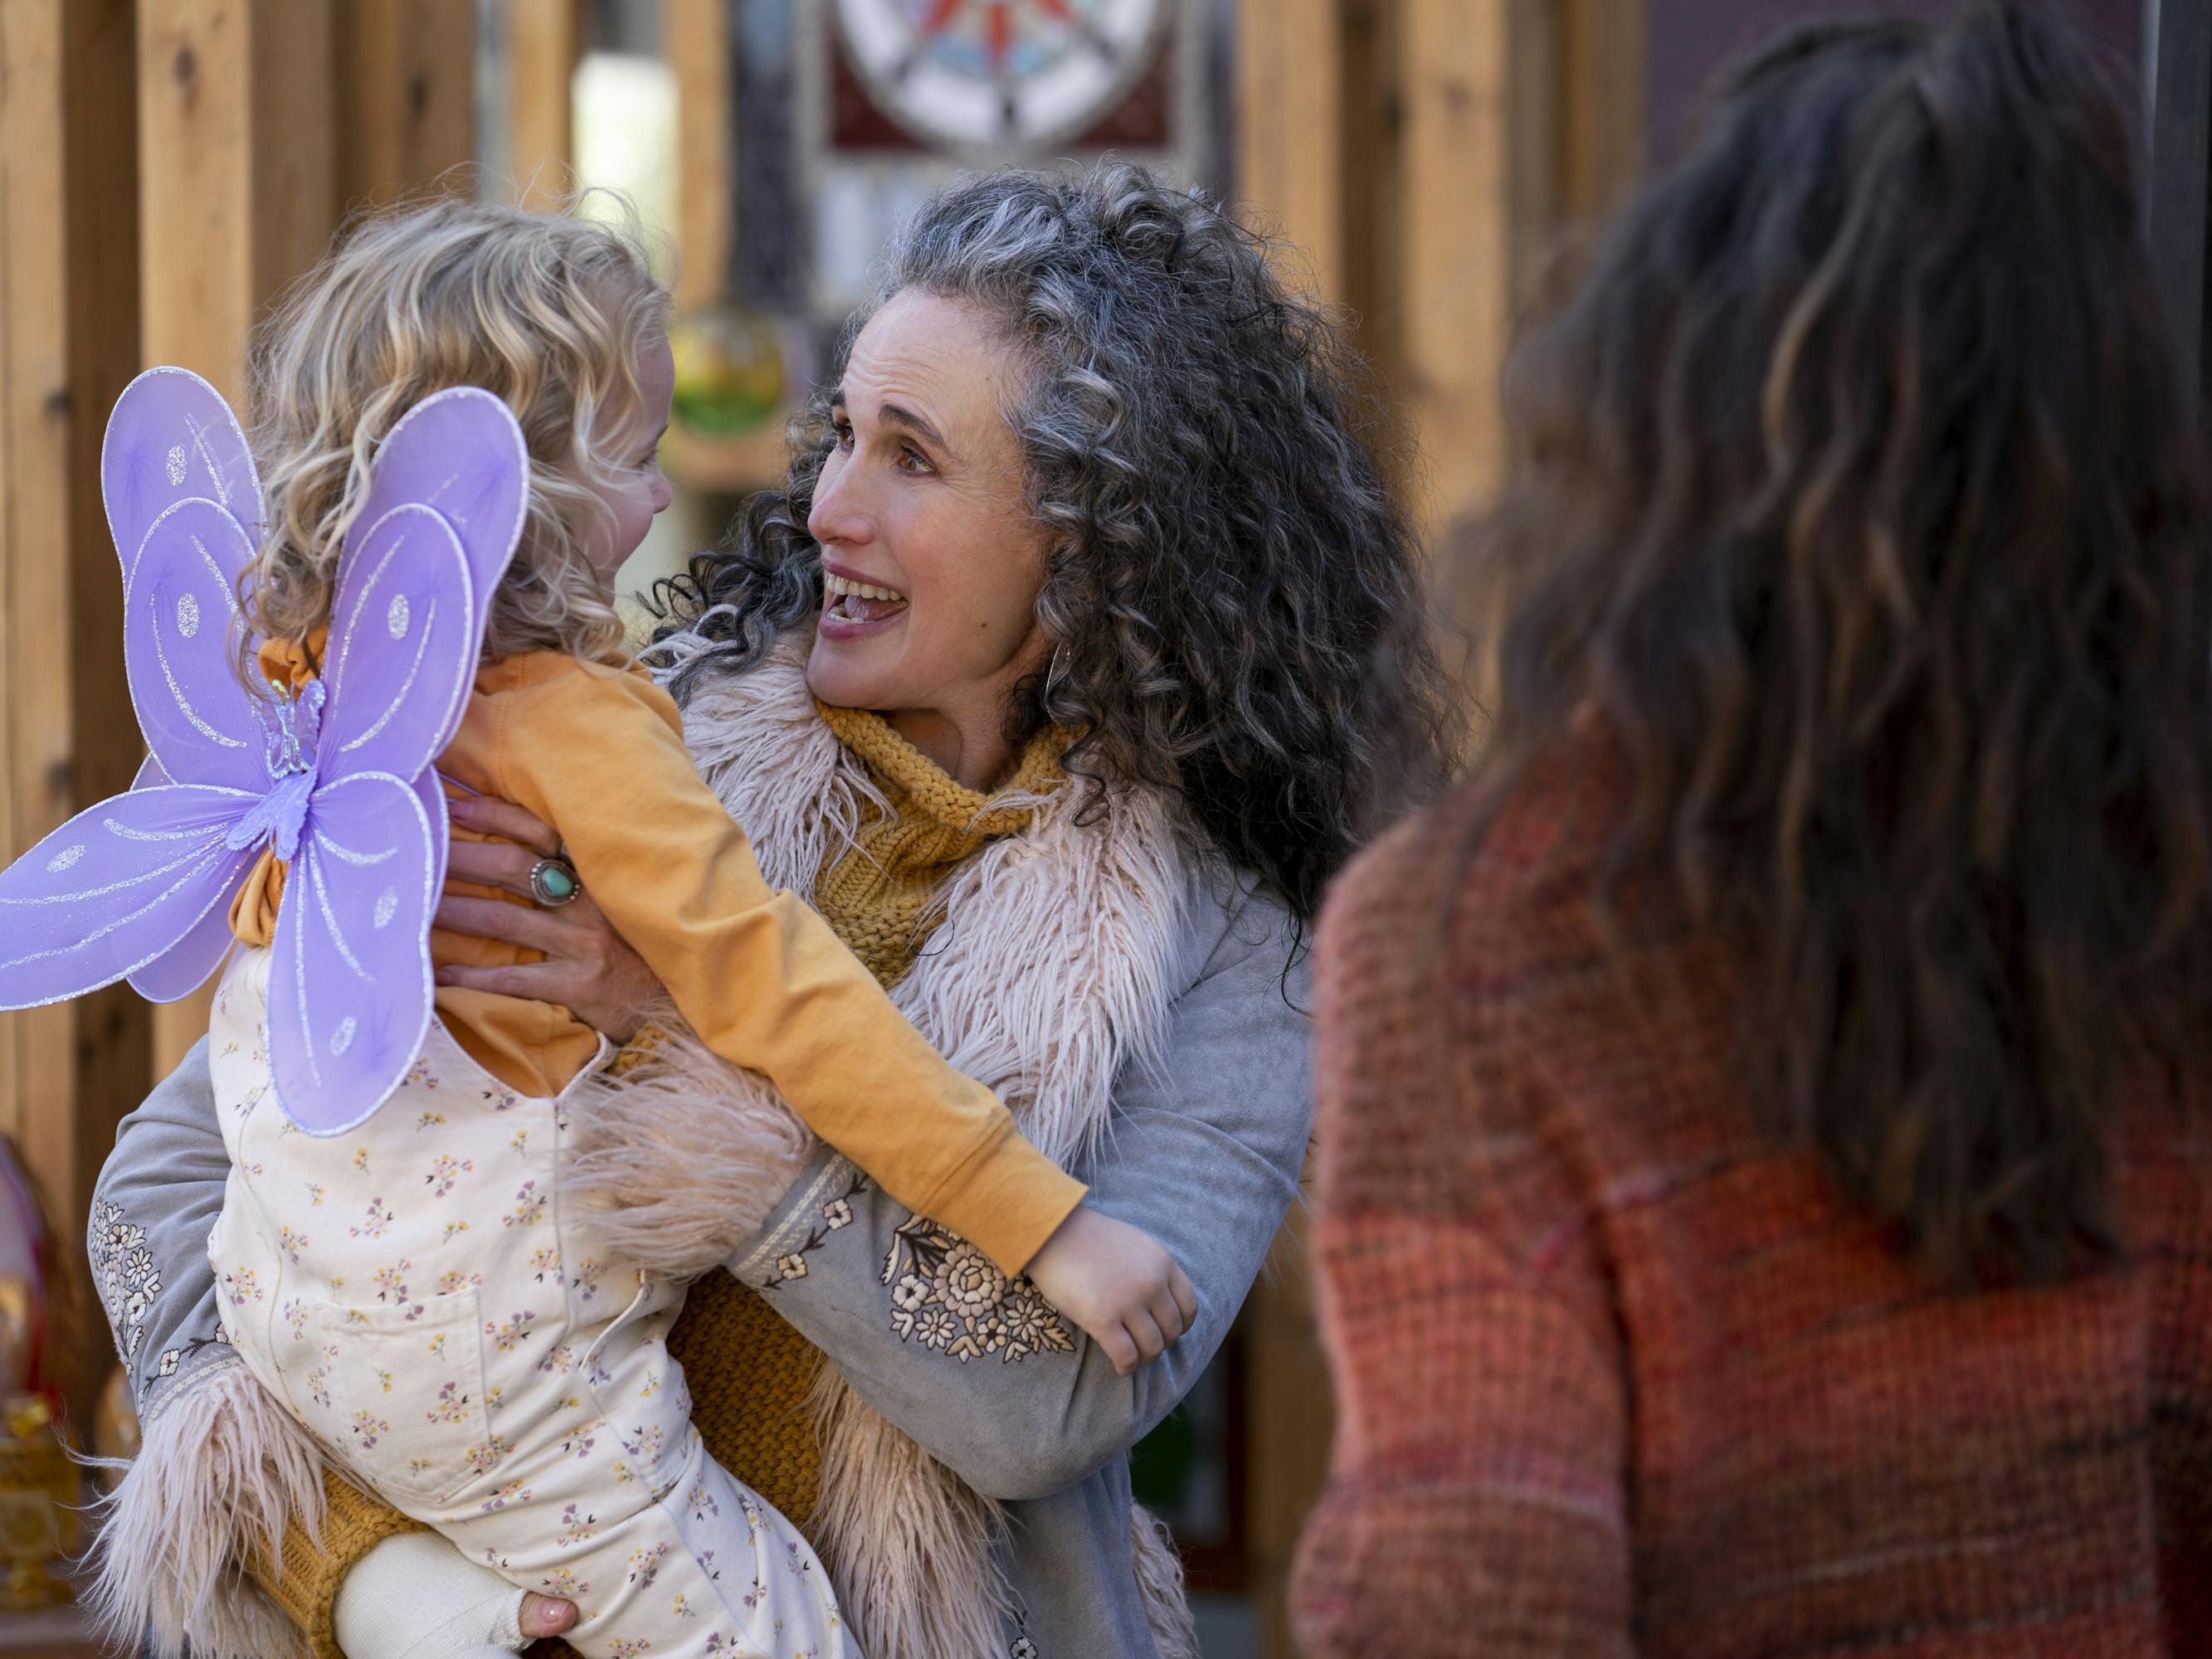 Maddy (Rylea Nevaeh Whittet), Paula (Andie MacDowell), and Alex (Margaret Qualley) stand around an outdoor fair. Maddy wears purple wings, Paula wears a feathery jacket, and Alex wears a red sweater.